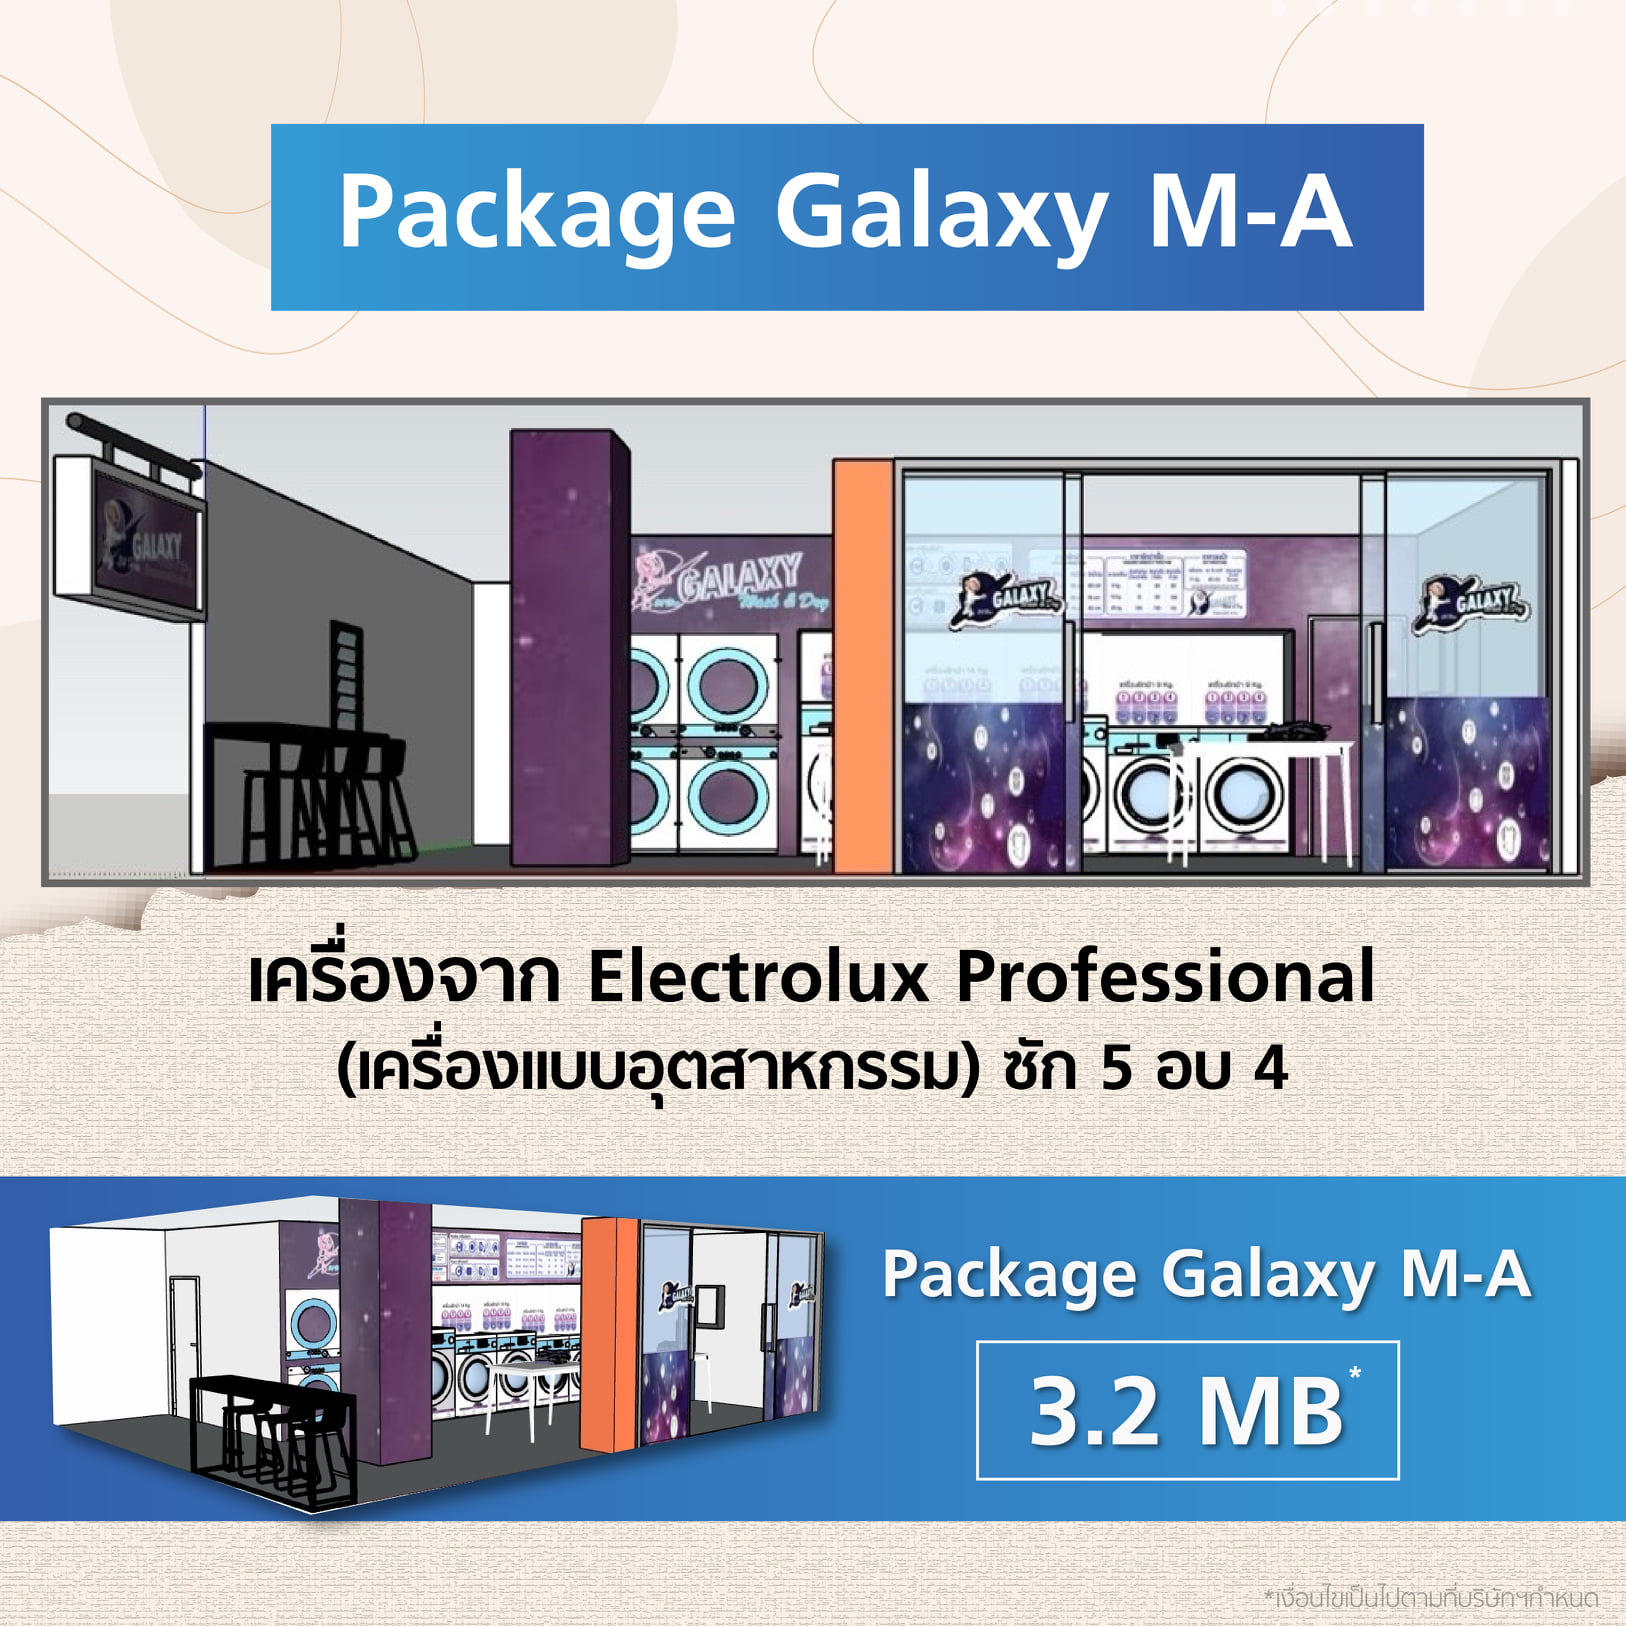 Package Galaxy M-A